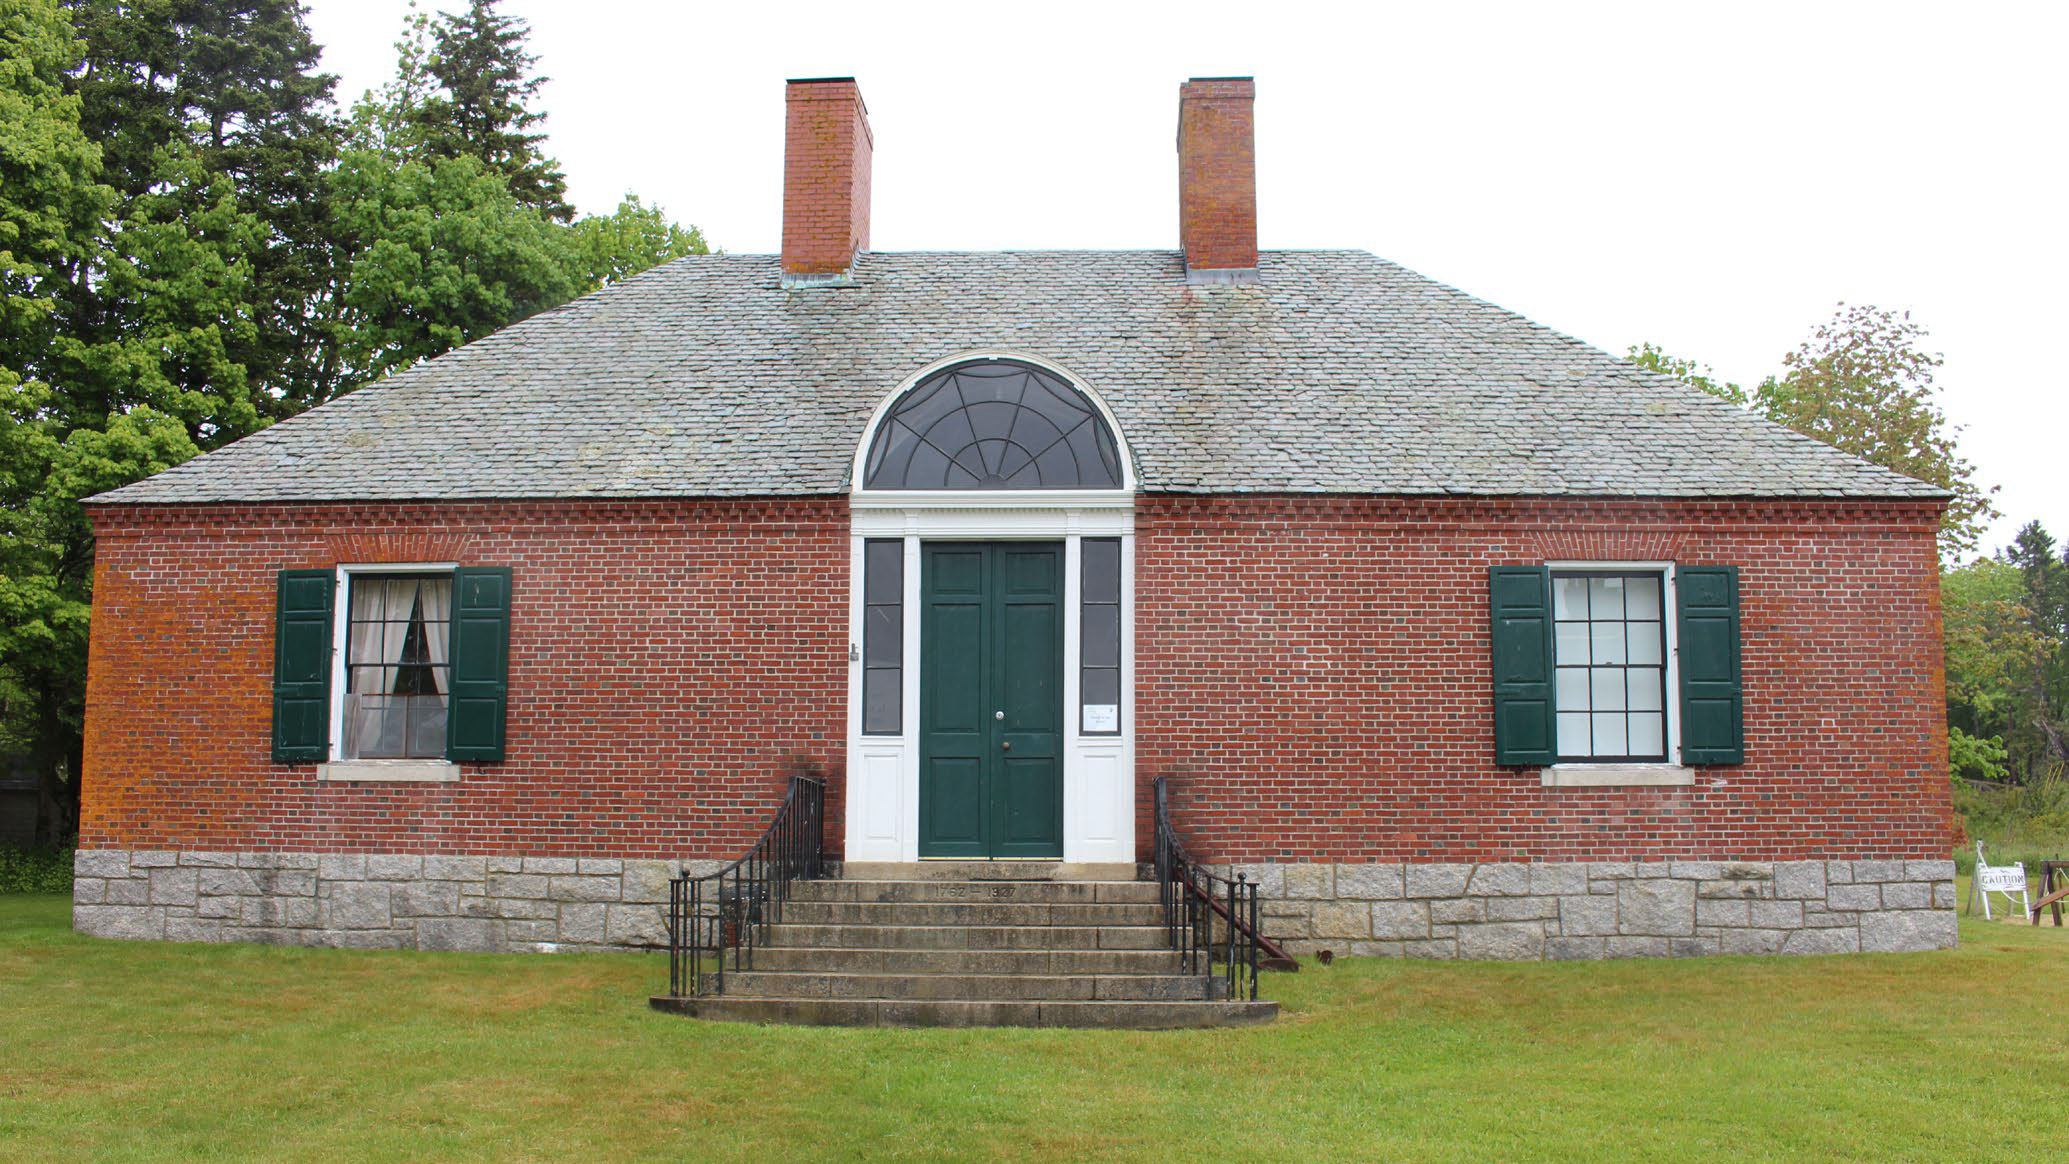 Historic brick building with slate roof, two chimneys, two windows with green shutters, and a green doorway at the center with an arched window above it